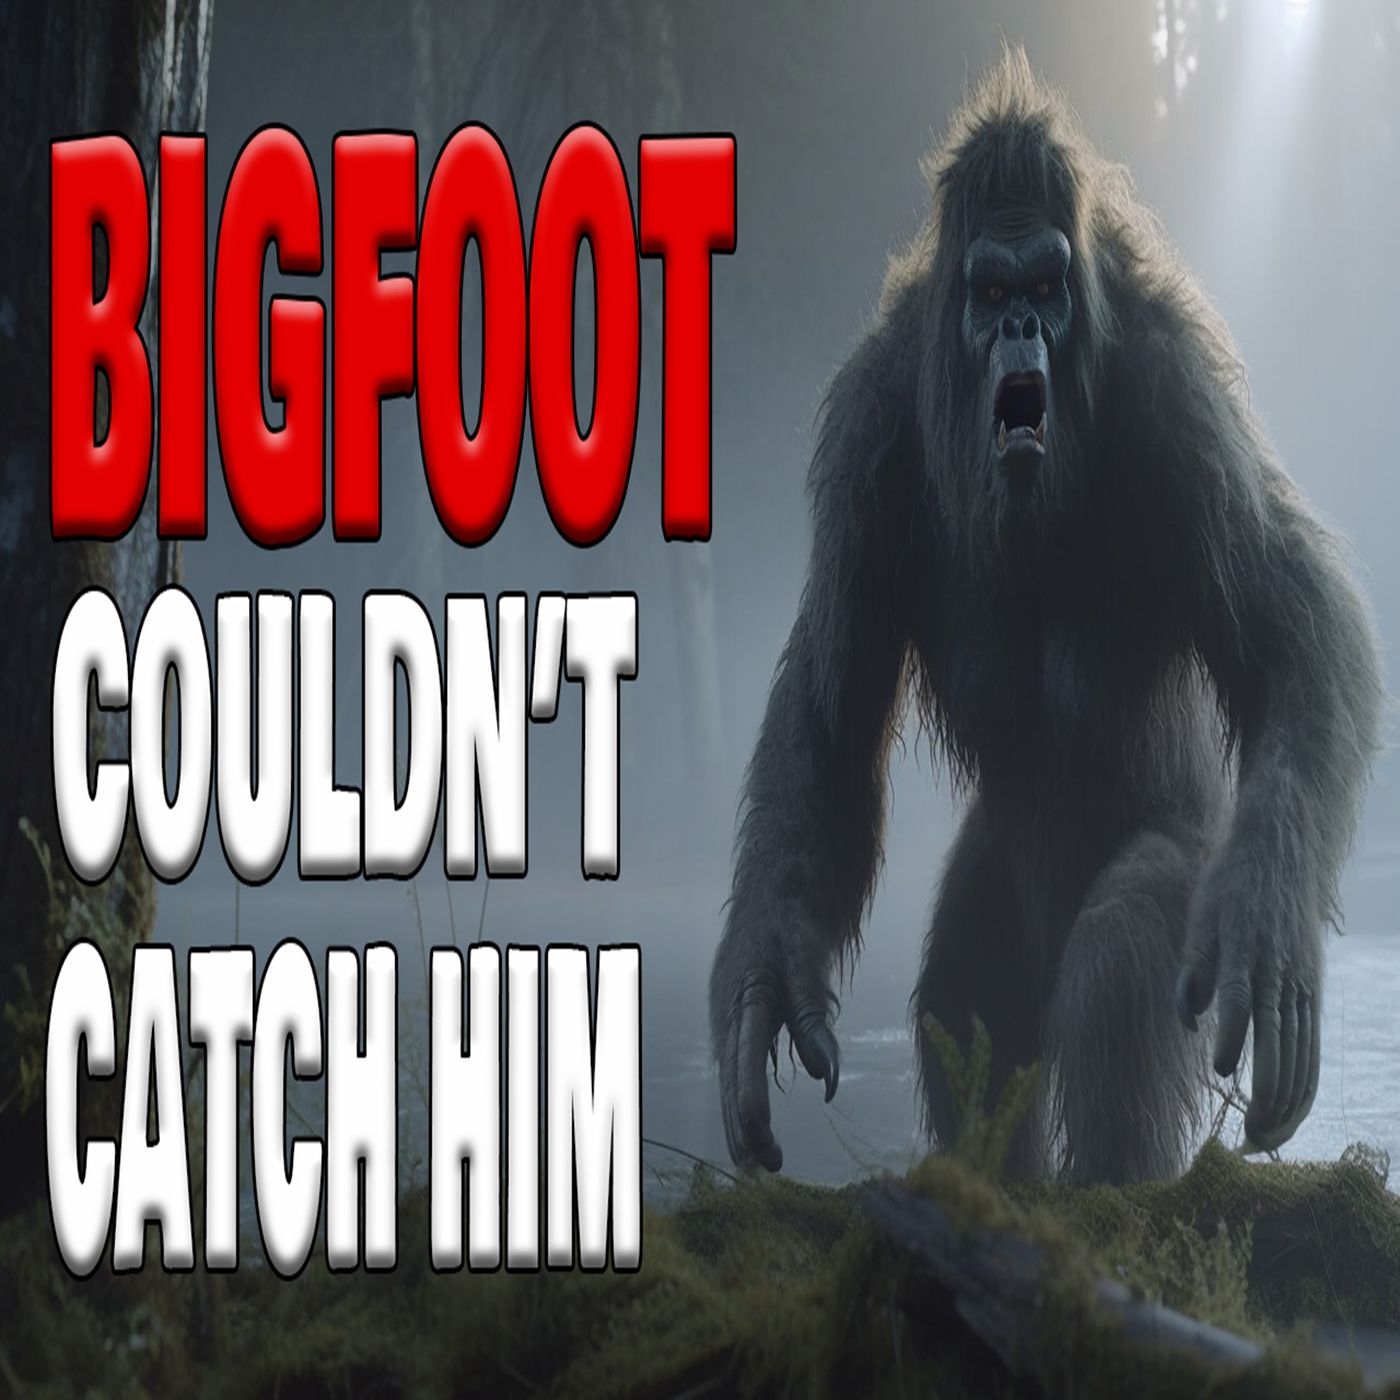 Bigfoot Couldn't Catch Him